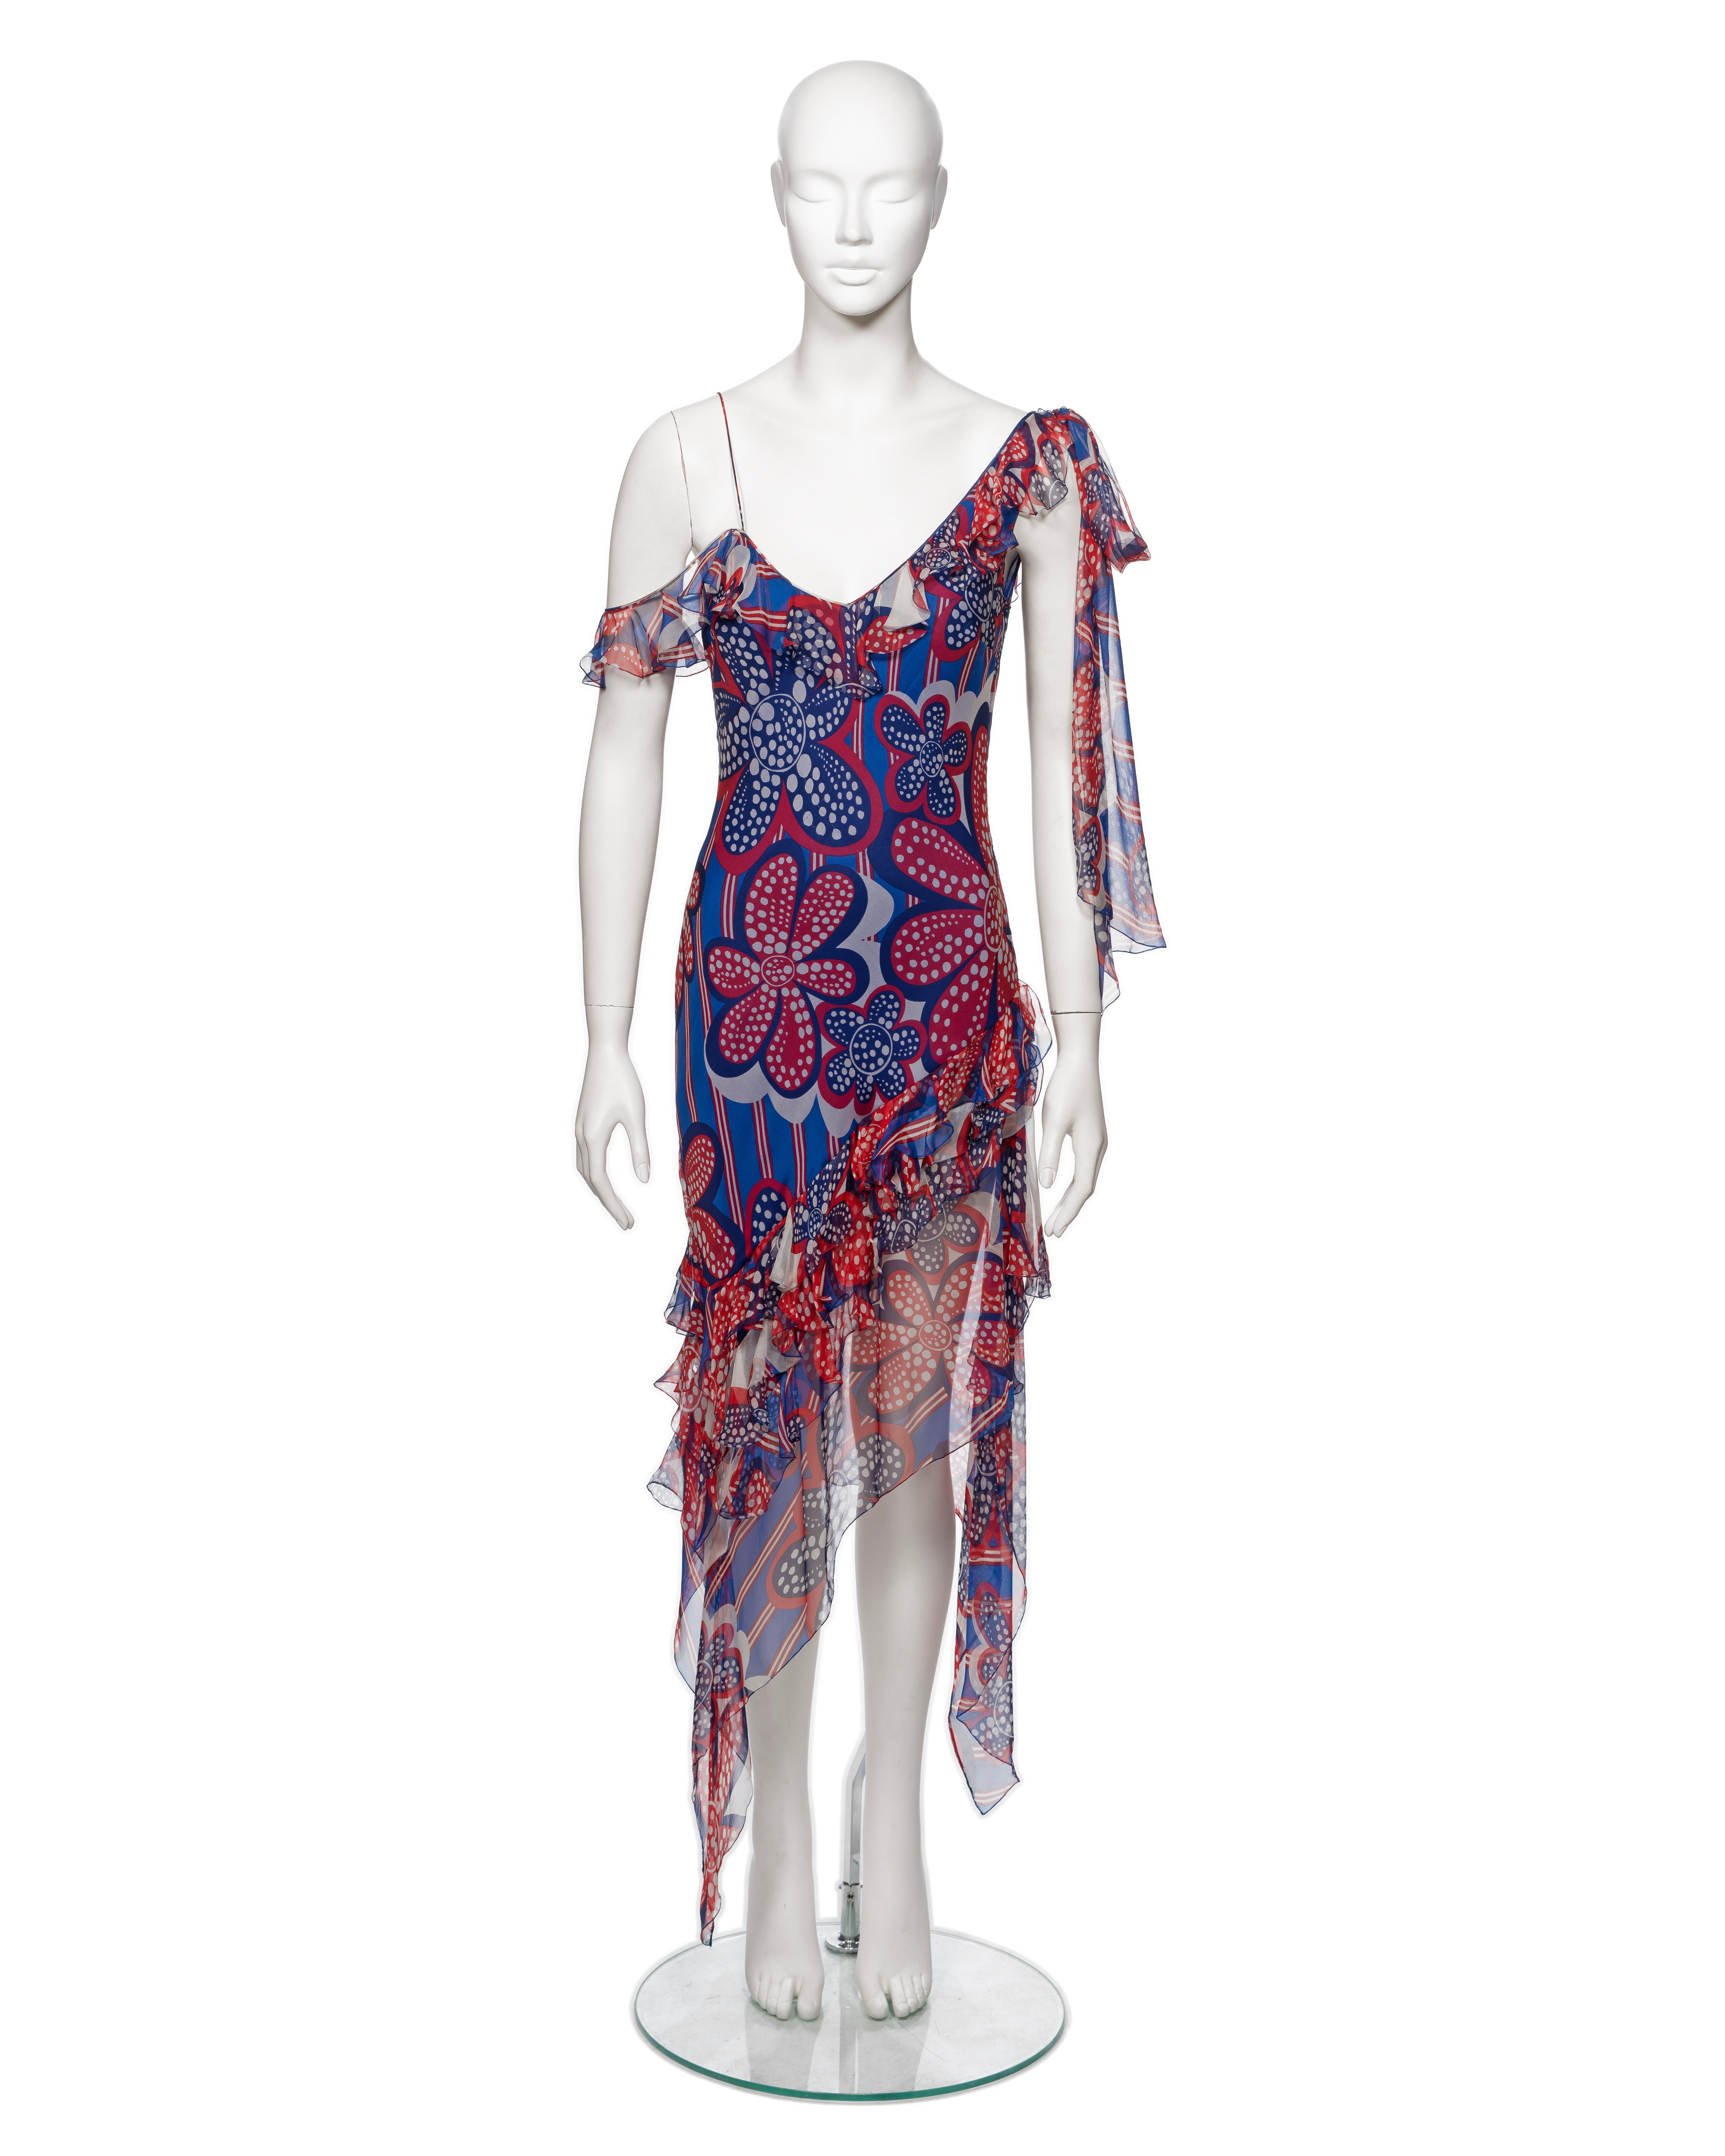 ▪ Brand: John Galliano
▪ Creative Director: John Galliano
▪ Collection: Spring-Summer 2002
▪ Sold by: One of a Kind Archive
▪ Fabric: Silk
▪ Details: Red, blue and white 70's inspired floral print, ruffled trim, asymmetric hemline, two long ties at